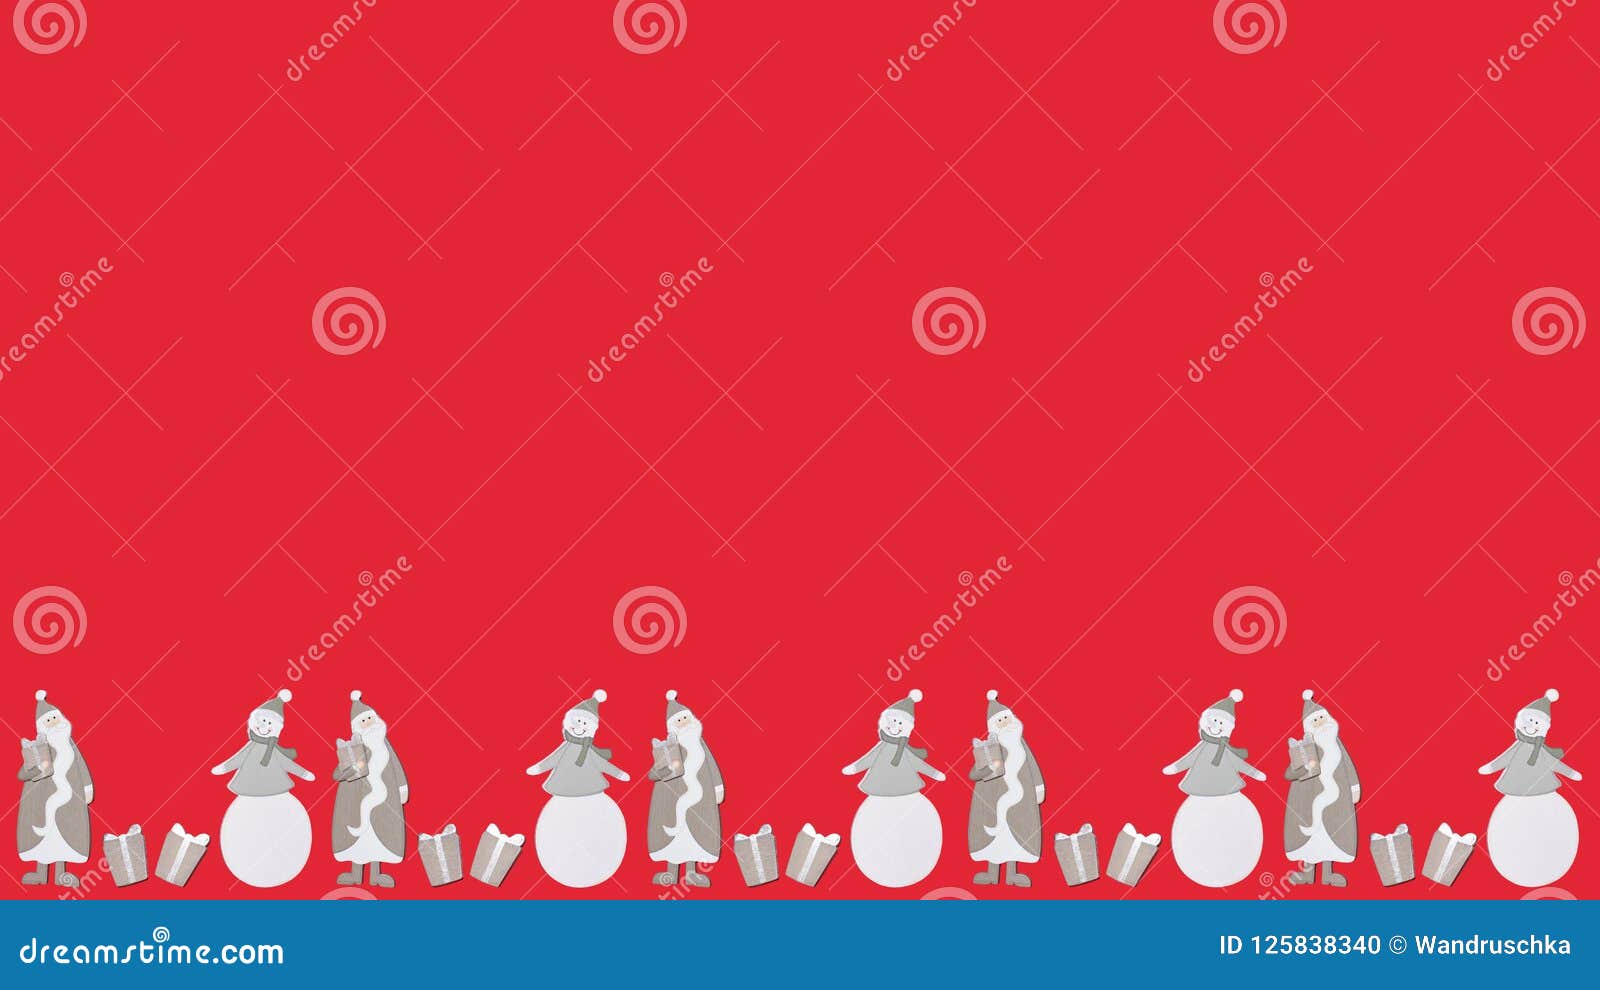 Handing Out Flyers Stock Illustrations – 12 Handing Out Flyers Stock  Illustrations, Vectors & Clipart - Dreamstime